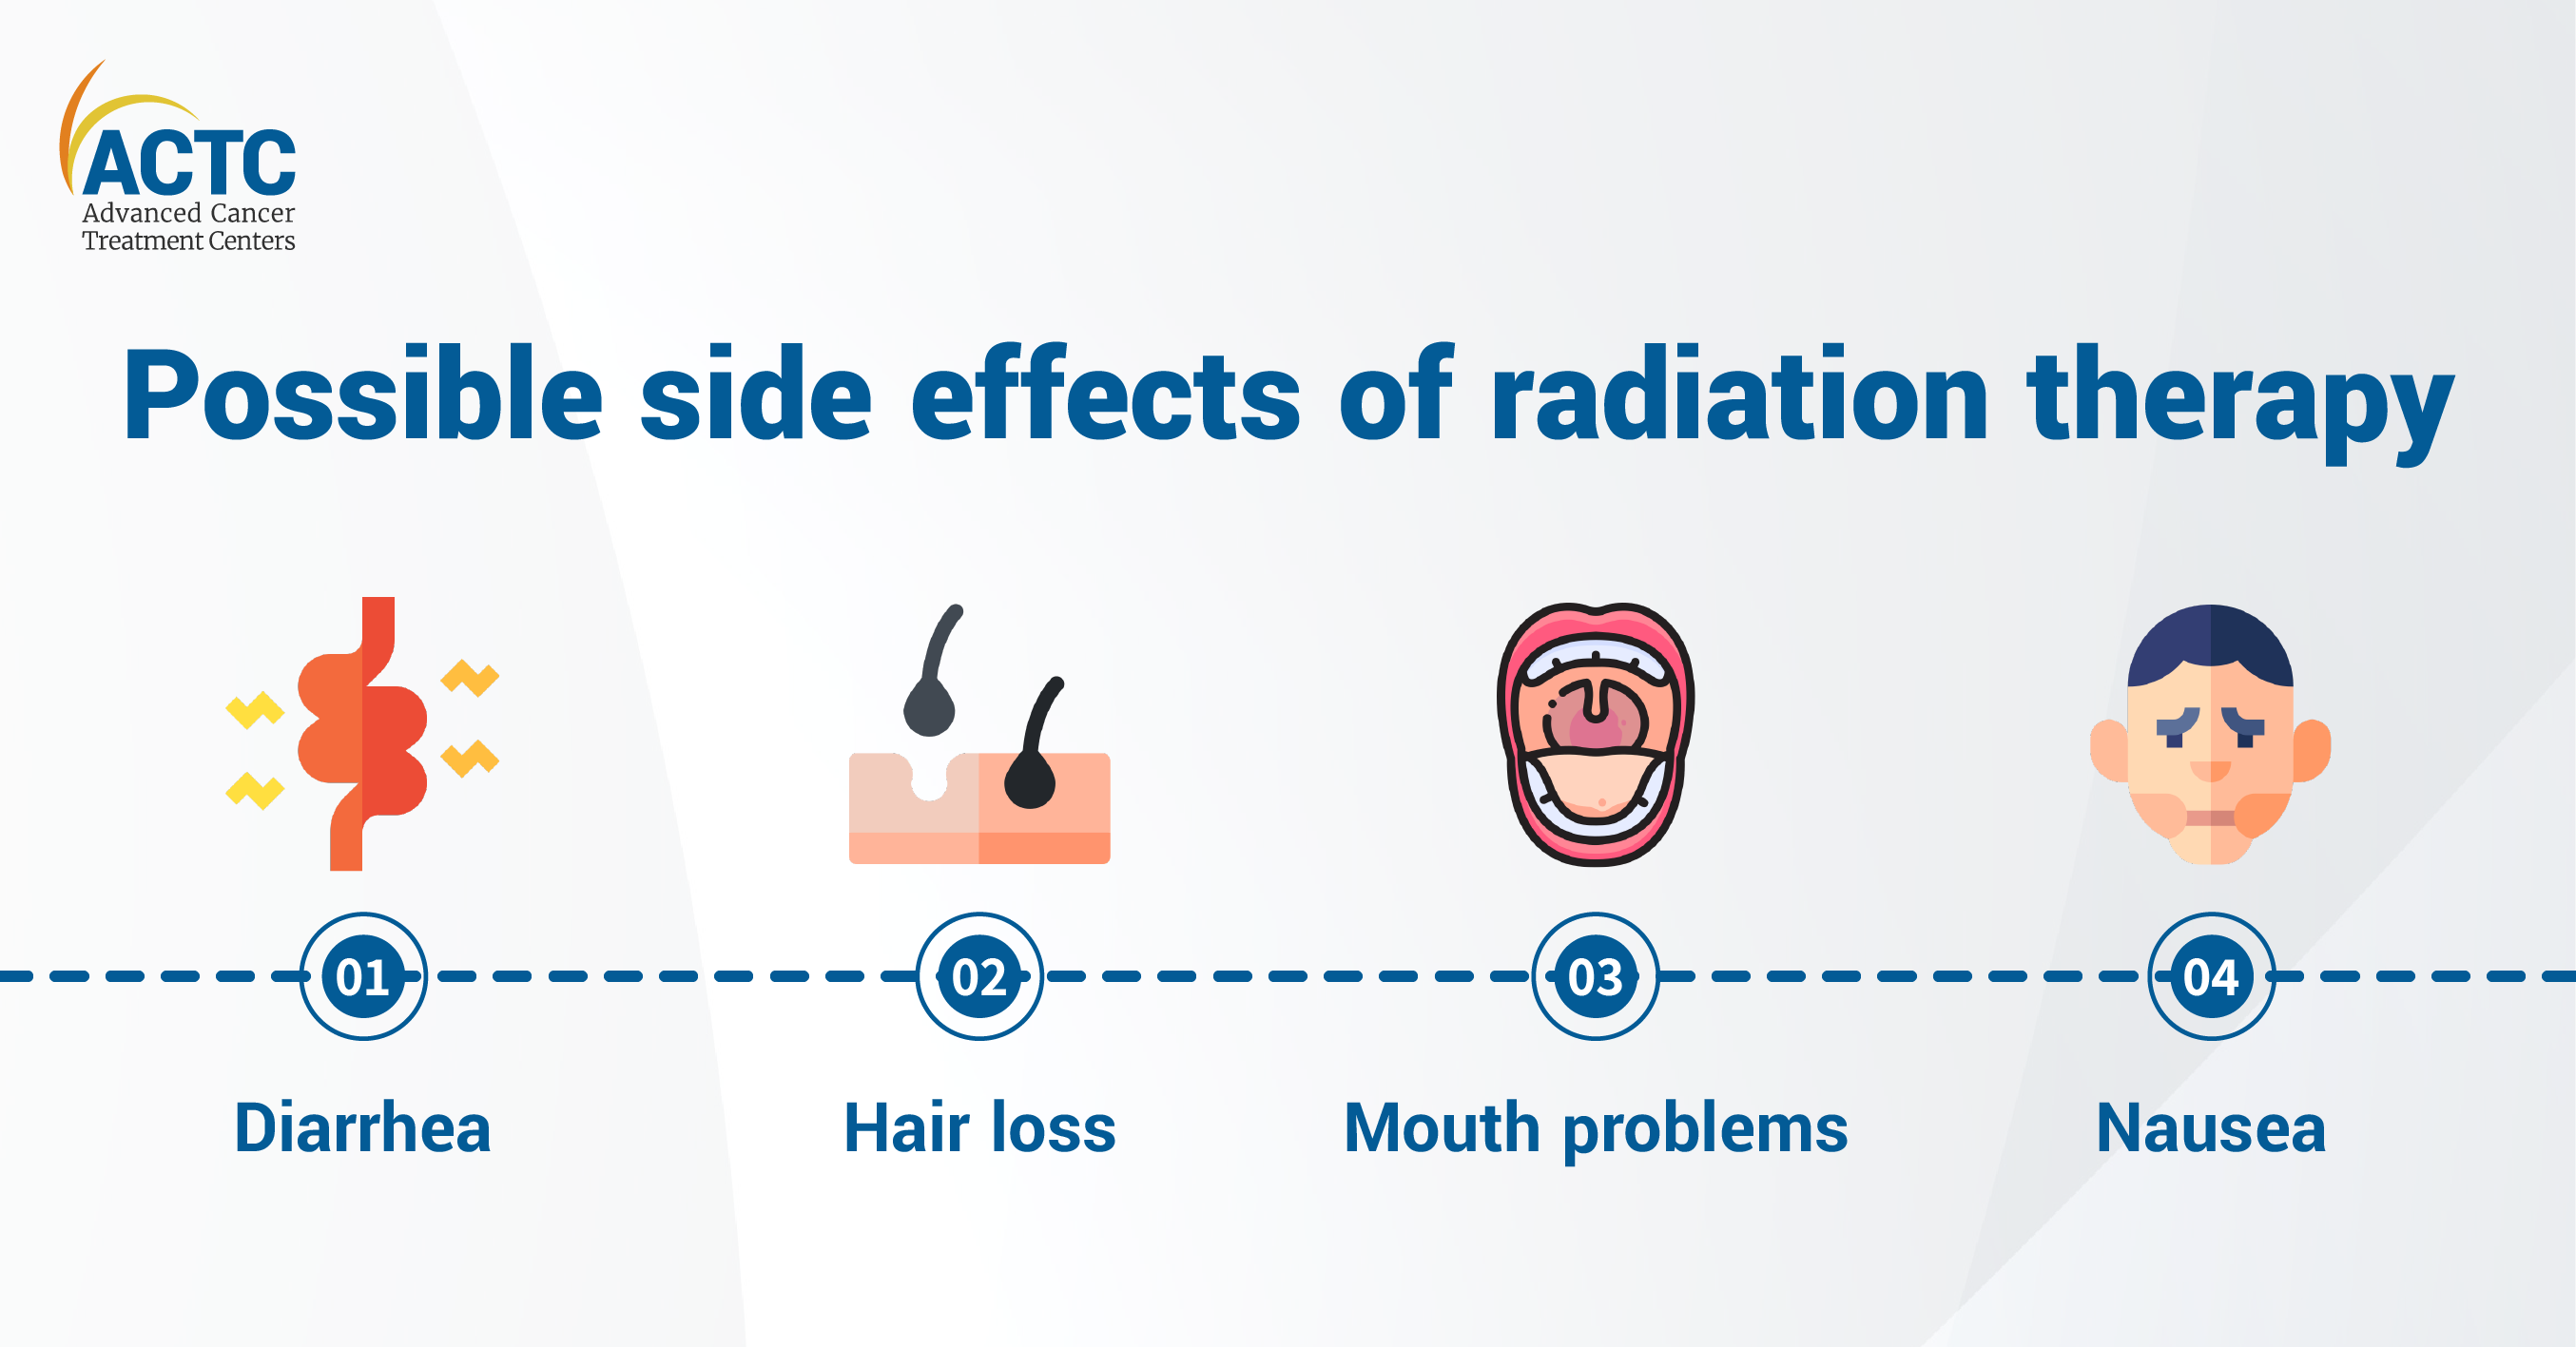 What are the common side effects of radiation therapy?